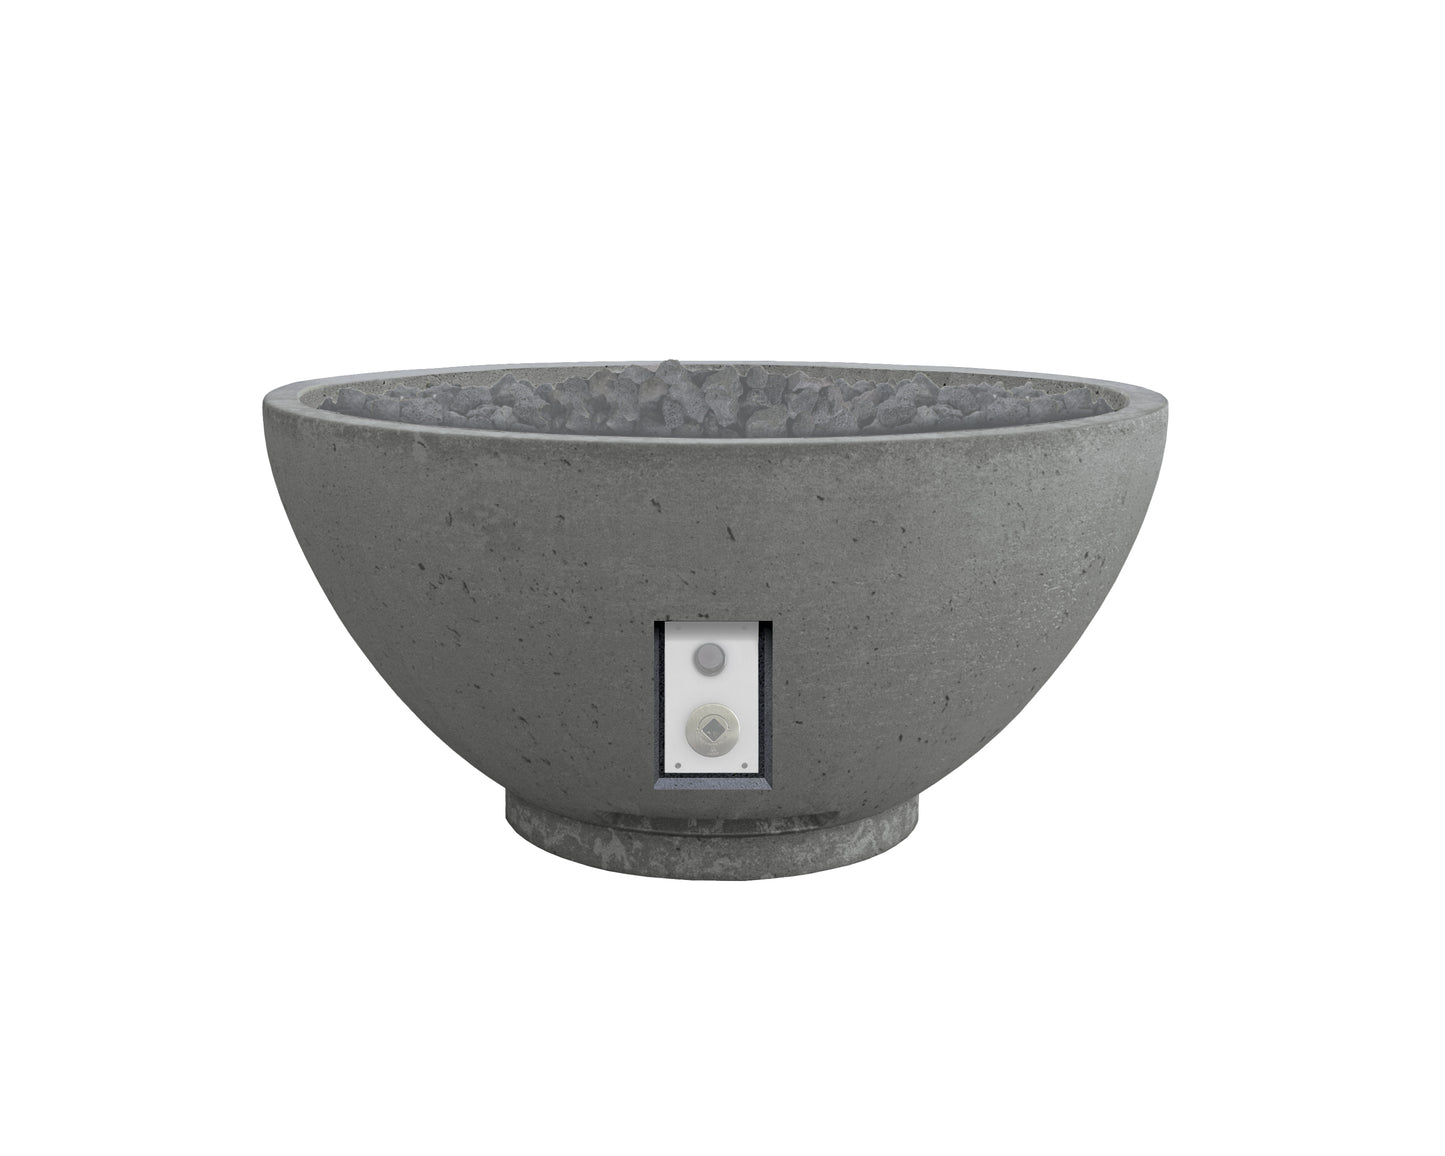 Firegear 39" Sanctuary 2 Gas Fire Pit Bowl (With Stainless Steel Burner)